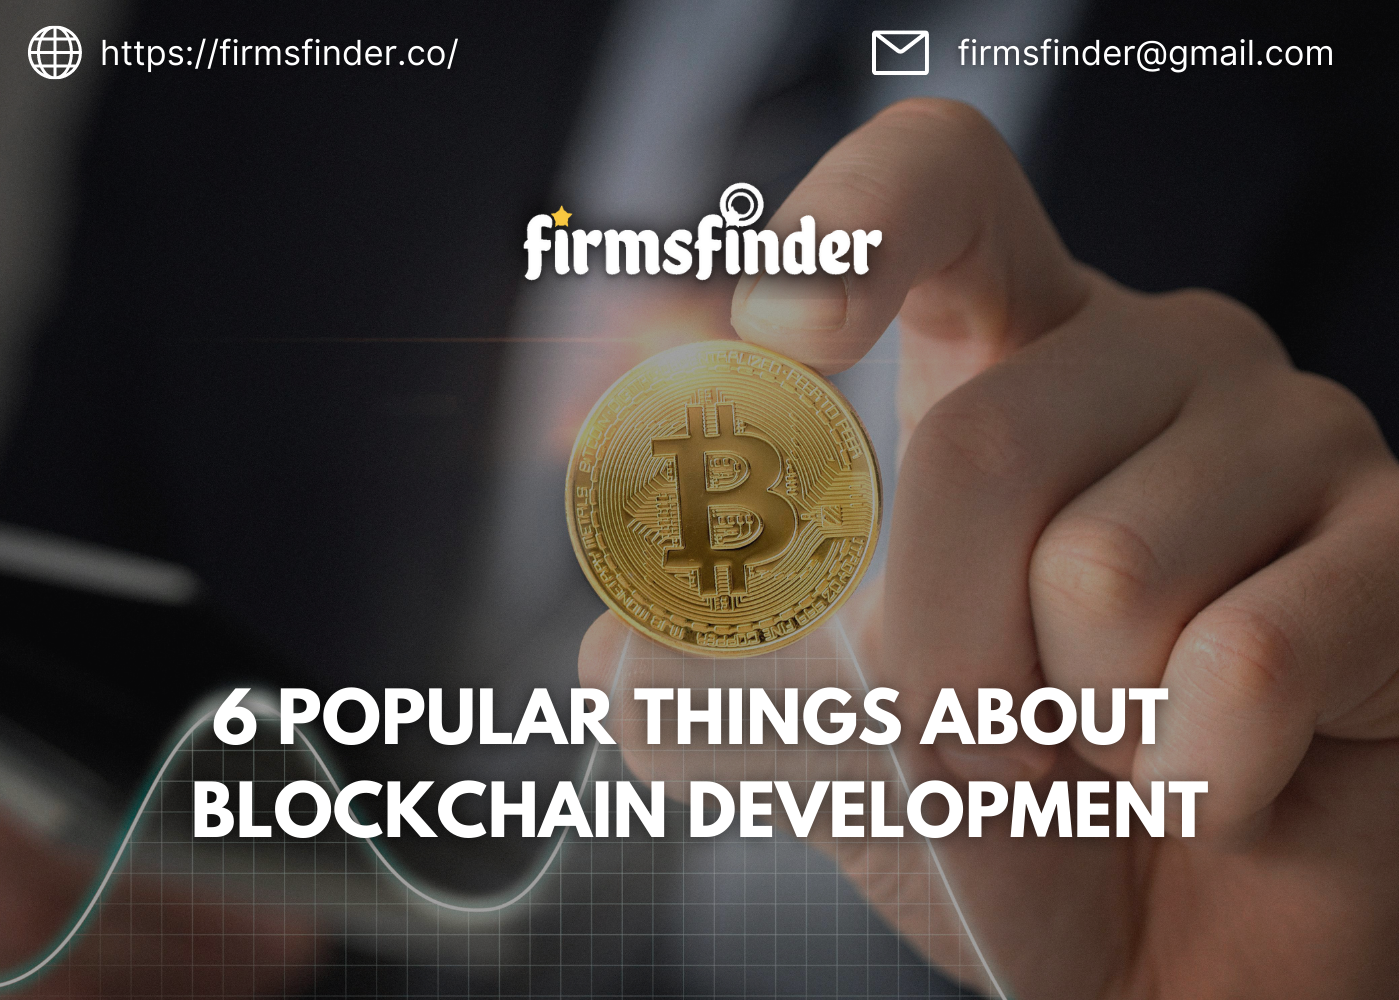 Six popular things about Block-chain development